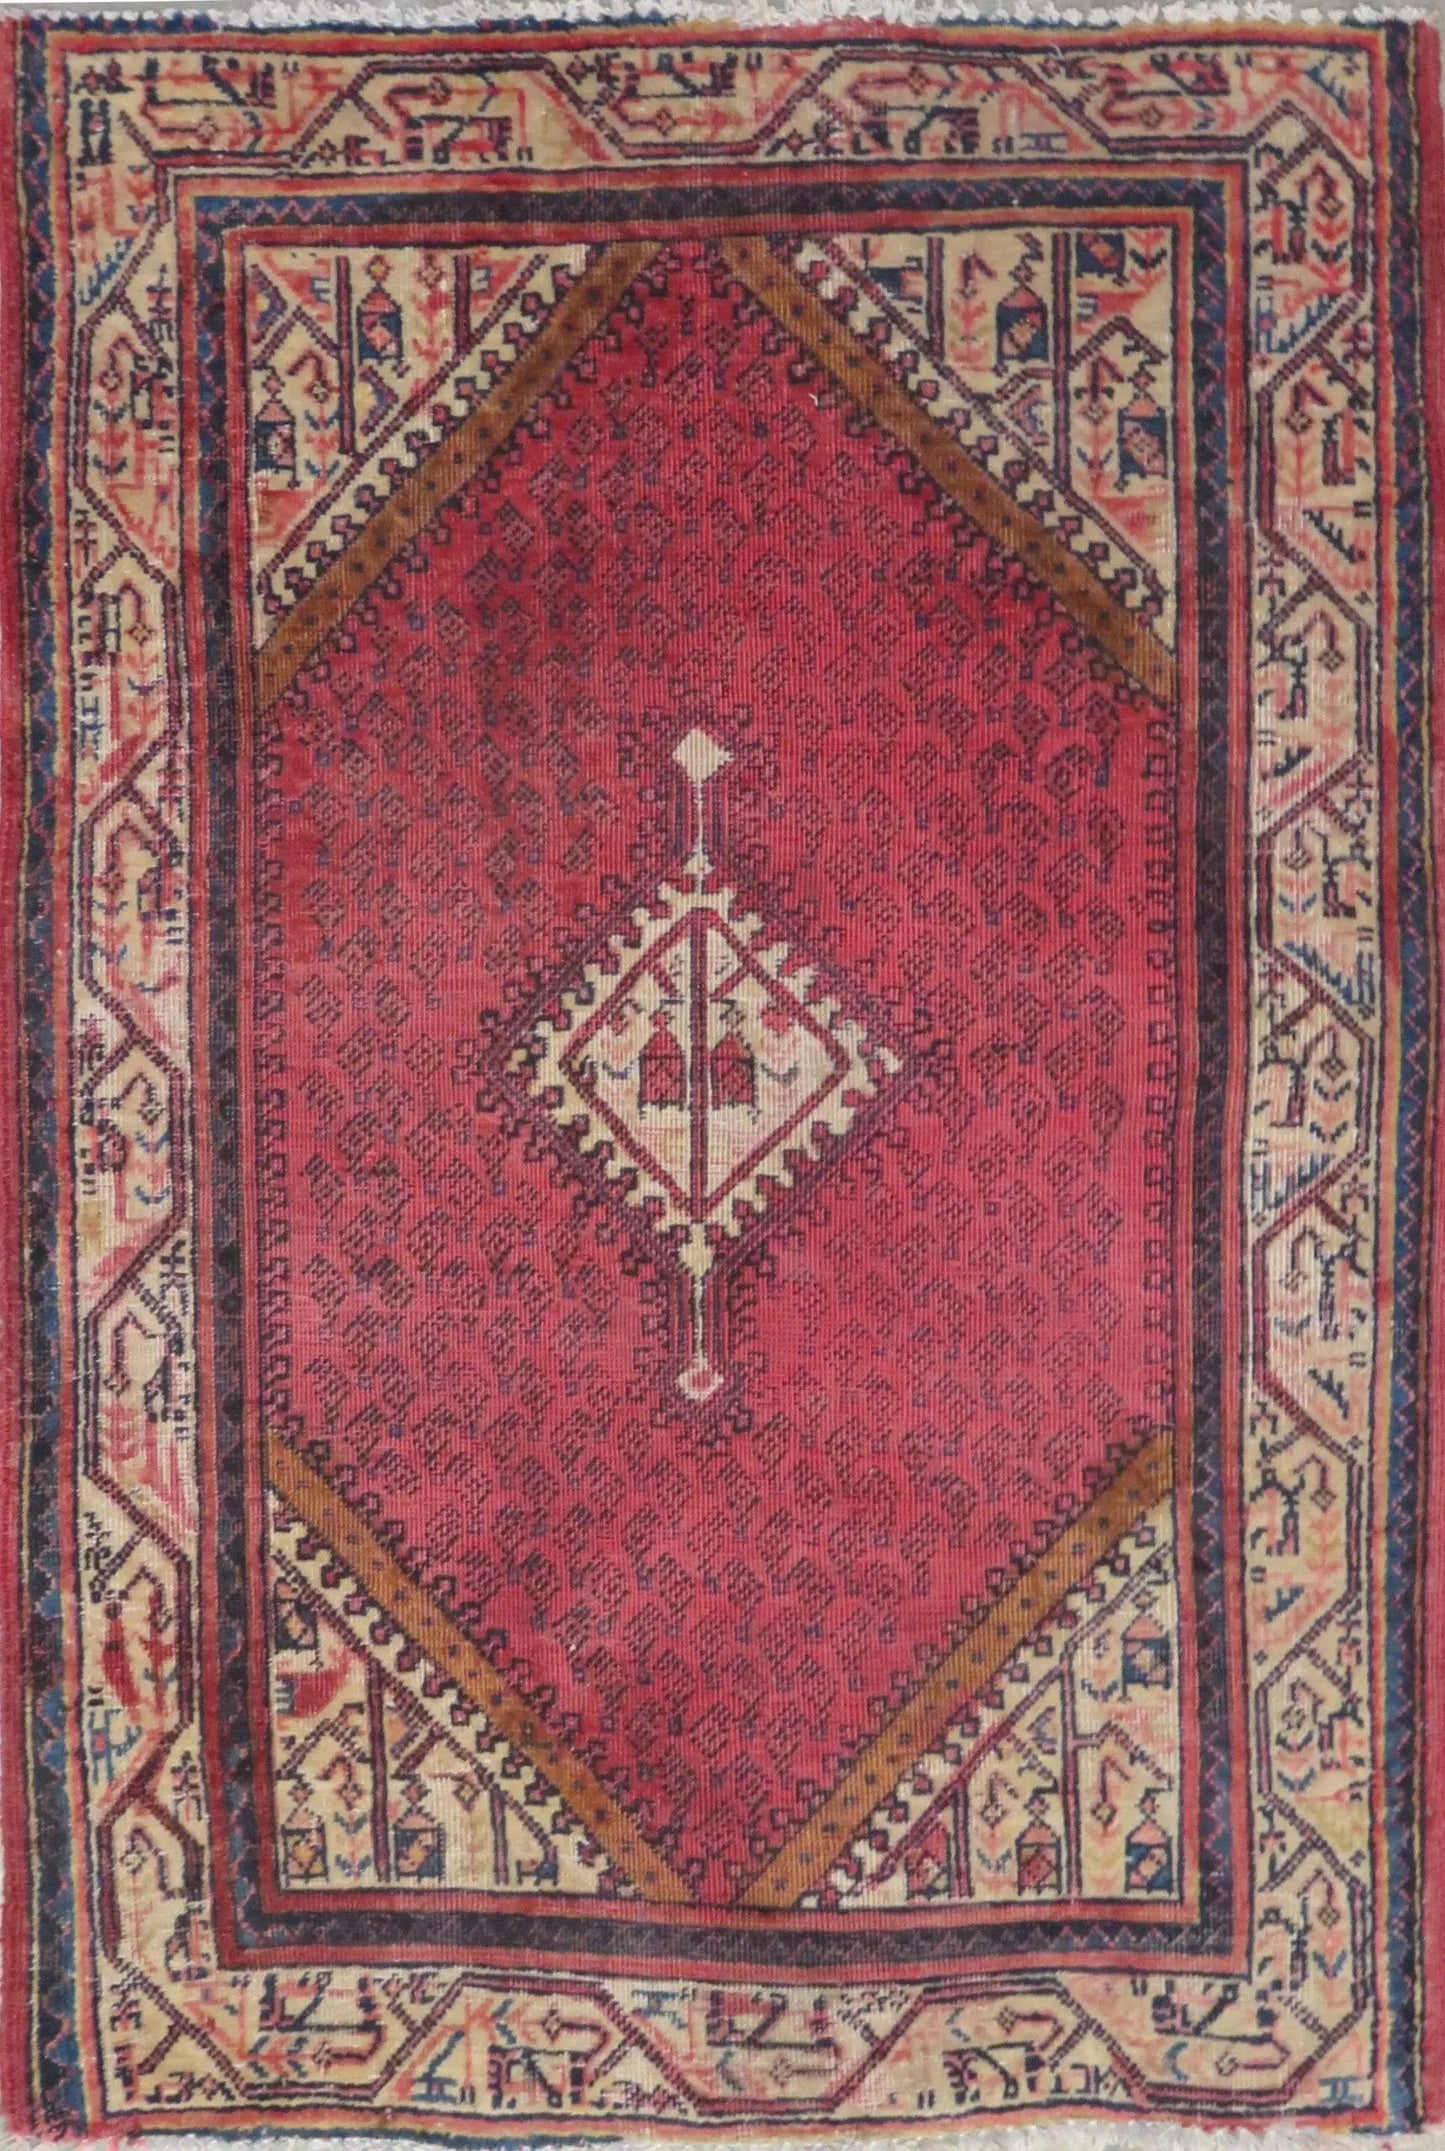 Hand-Knotted Persian Wool Rug _ Luxurious Vintage Design, 4'9" x 3'4", Artisan Crafted